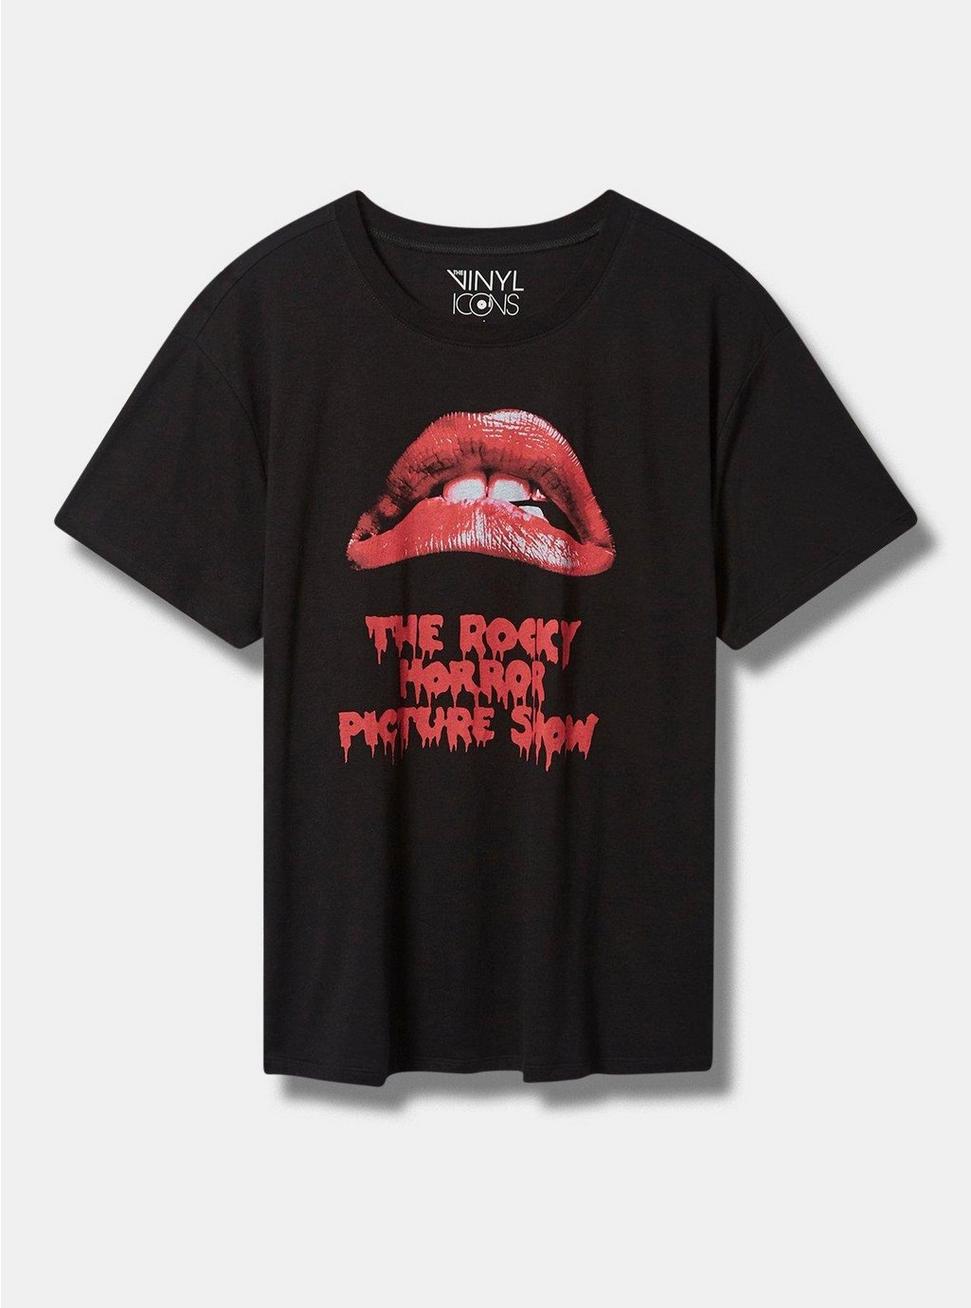 Plus Size The Rocky Horror Picture Show Relaxed Fit Cotton Boxy Tee, DEEP BLACK, hi-res